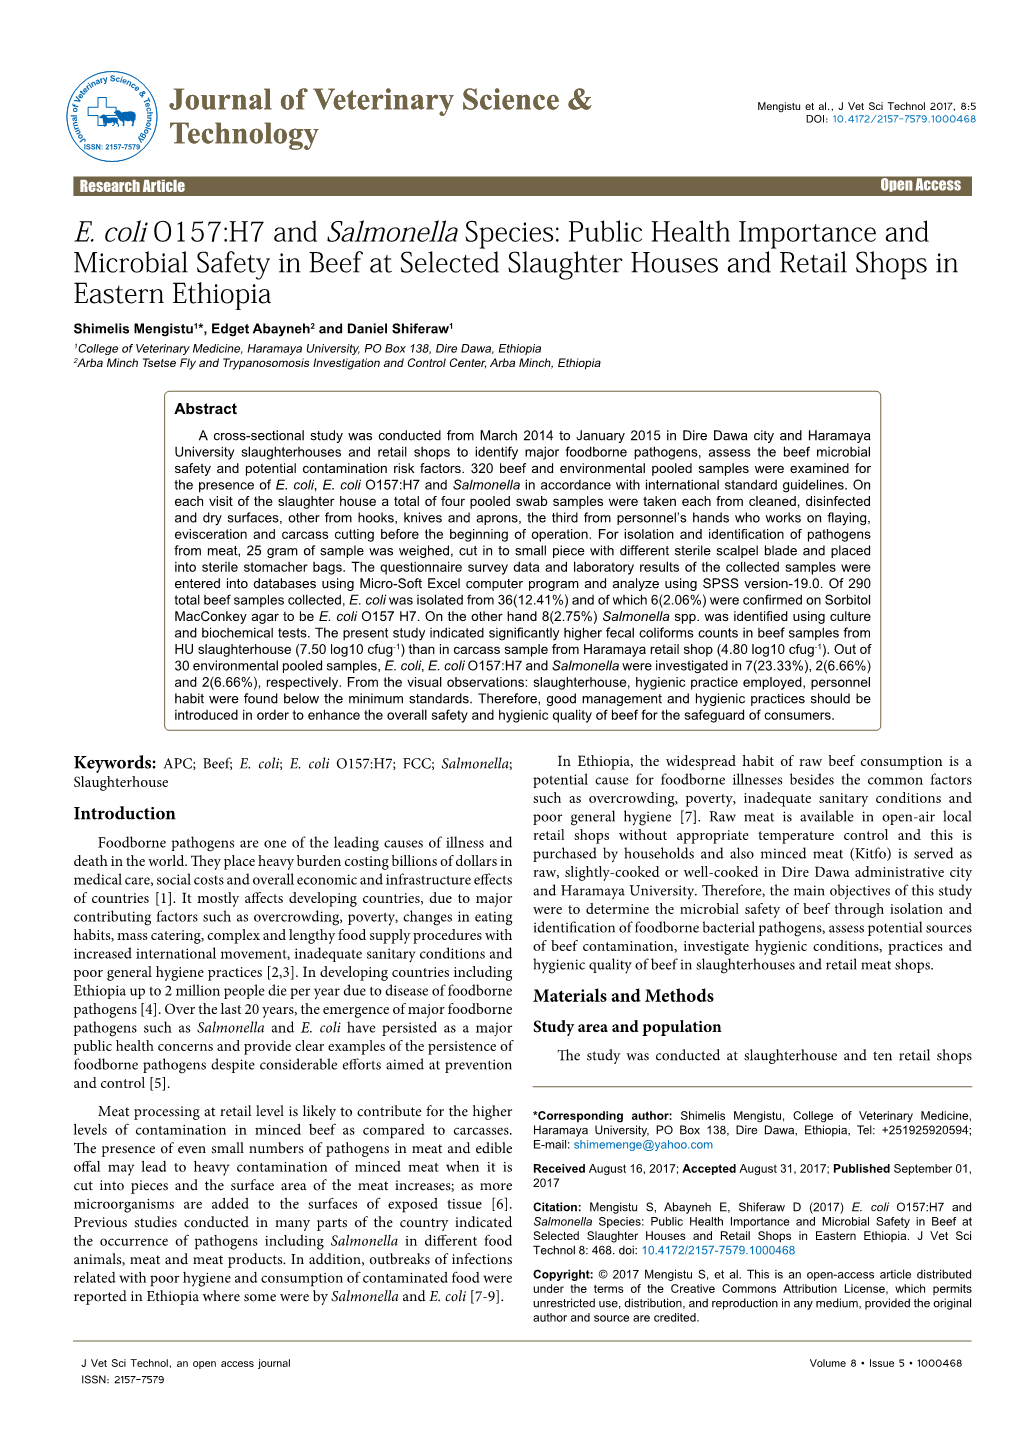 E. Coli O157:H7 and Salmonella Species: Public Health Importance and Microbial Safety in Beef at Selected Slaughter Houses and Retail Shops in Eastern Ethiopia